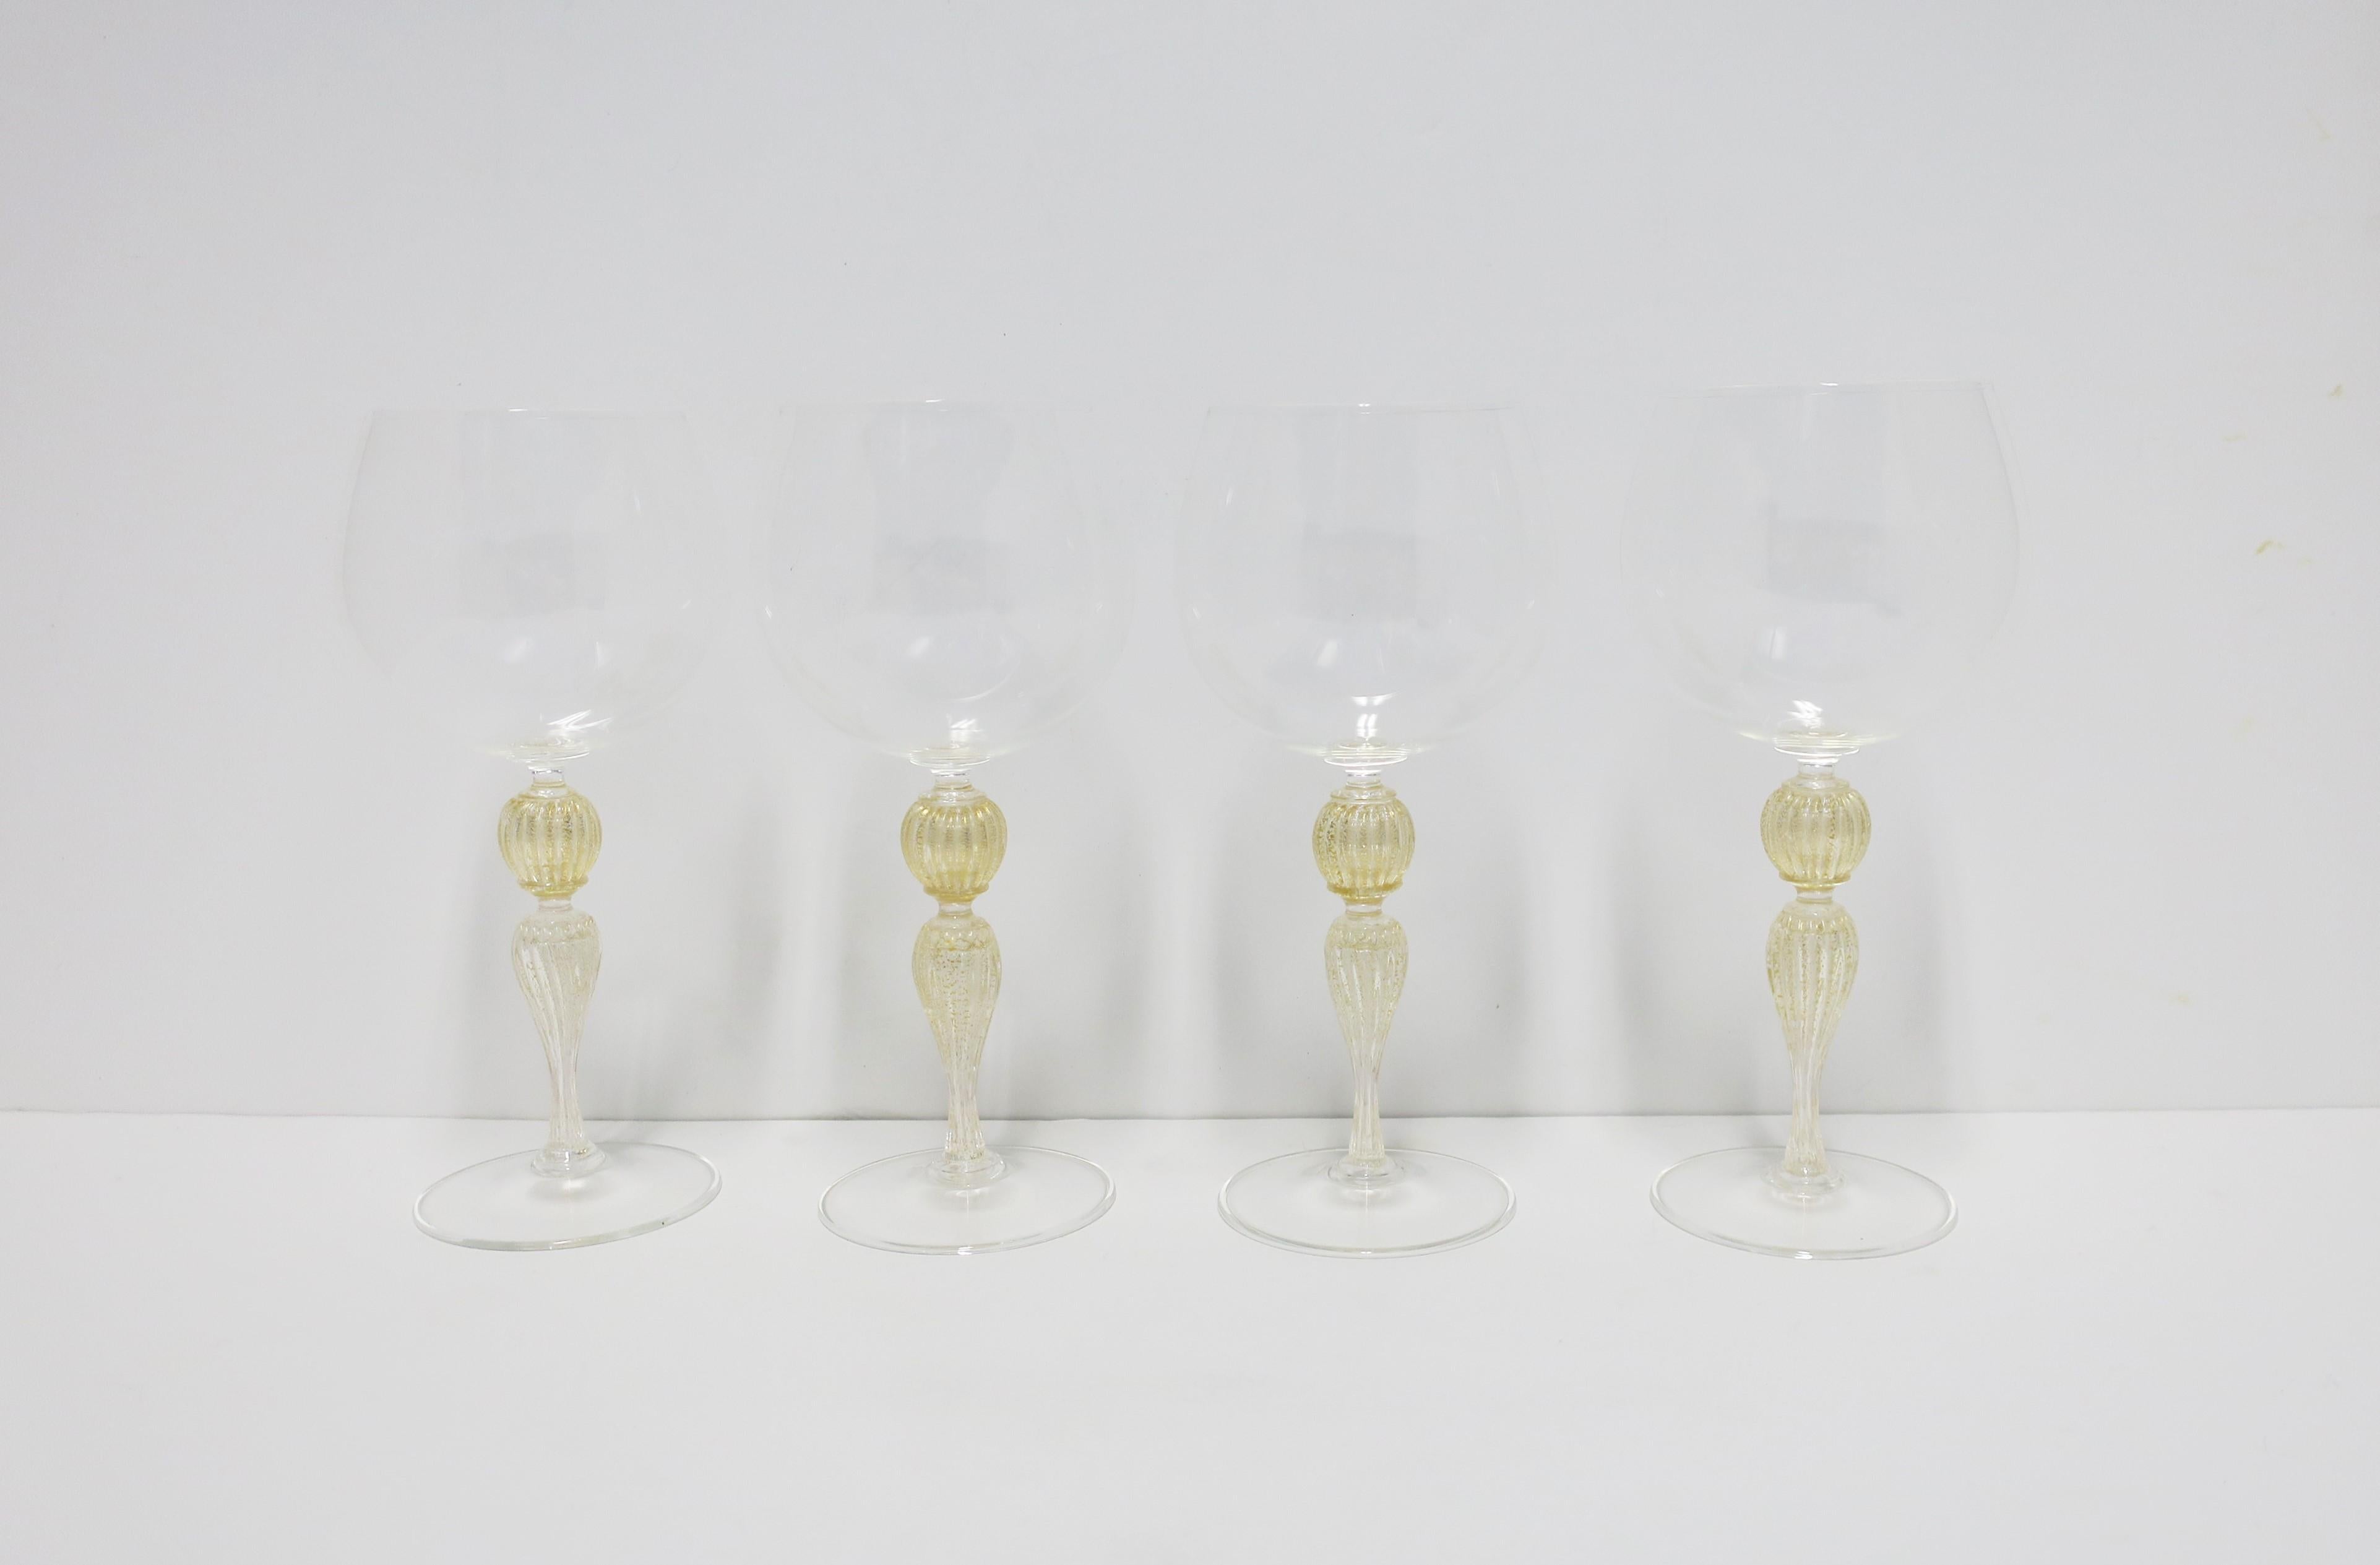 A beautiful set of four (4) Italian Venetian Murano gold and transparent art glass wine goblet glasses by Cenedese, circa late-20th century, Italy. Enjoy white or red wines with these beautiful glasses. Great for any bar, bar cart, entertaining